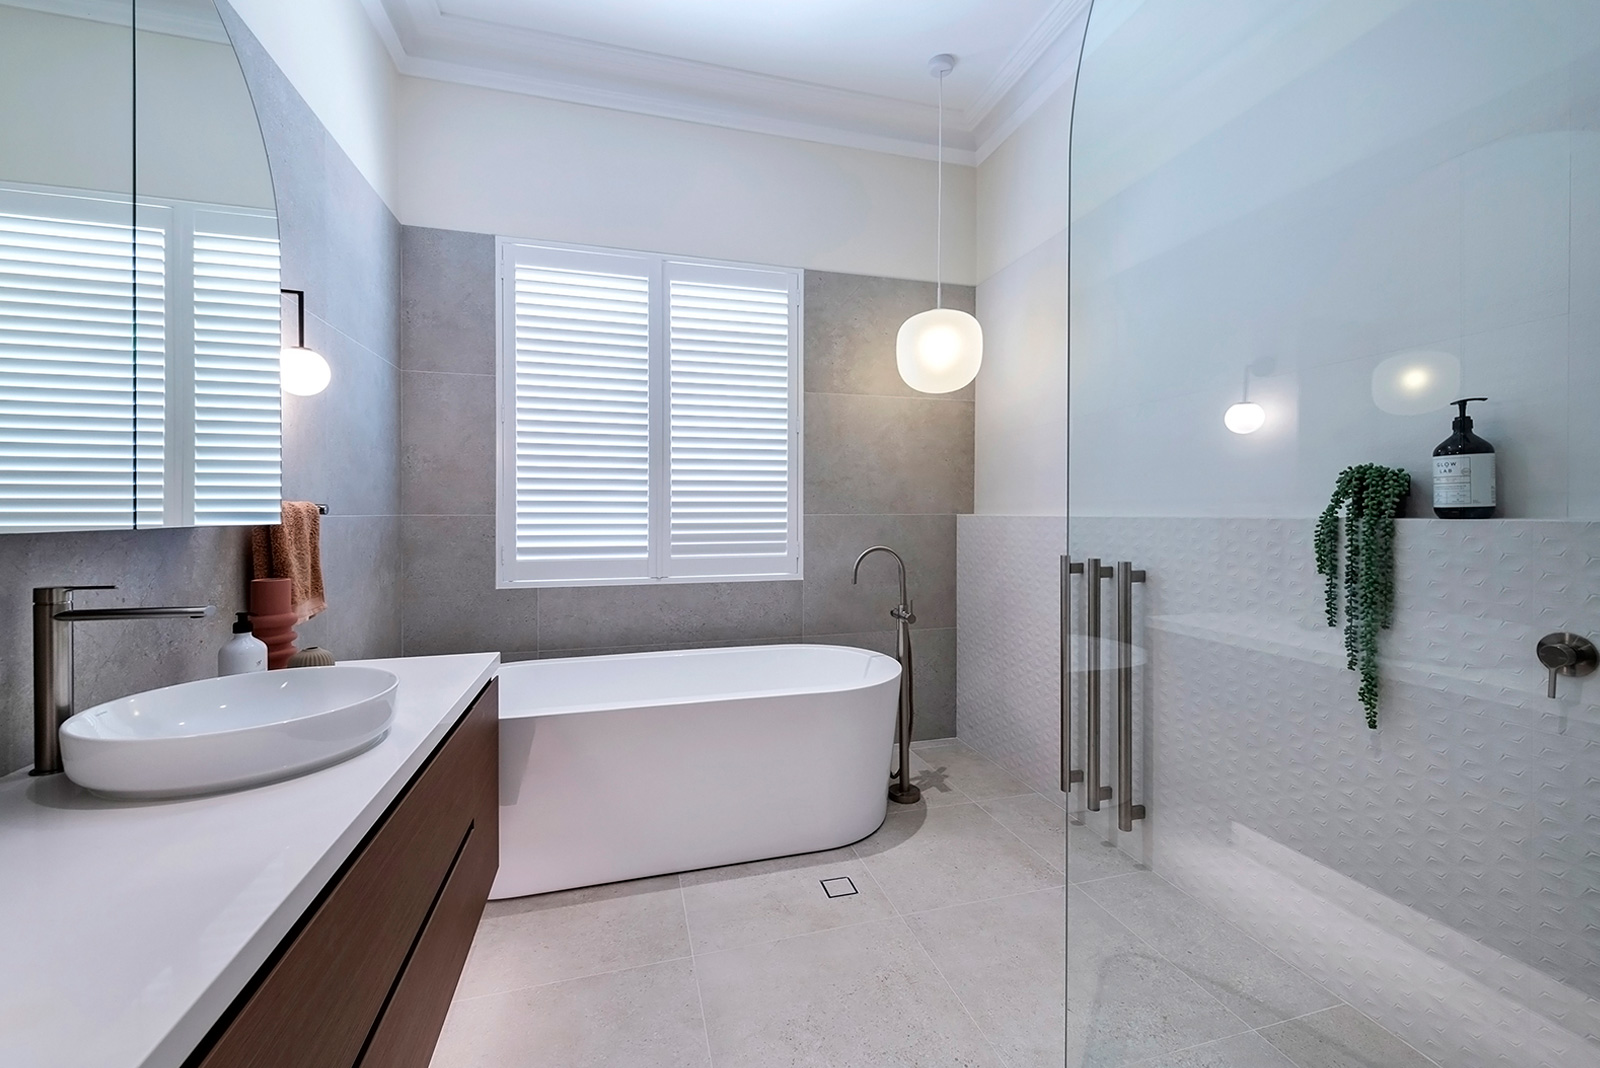 Bathroom in Costtesloe apartment with cabinetry designed by Studio Seventy Four